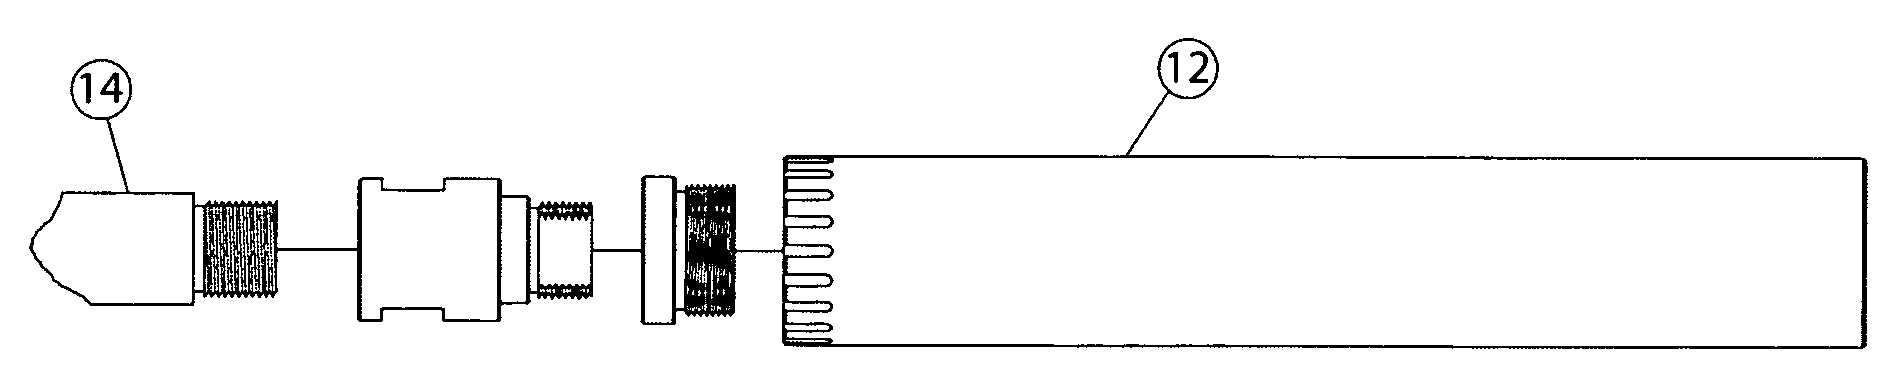 Interrupted thread mount primarily for attaching a noise suppressor or other auxiliary device to a firearm